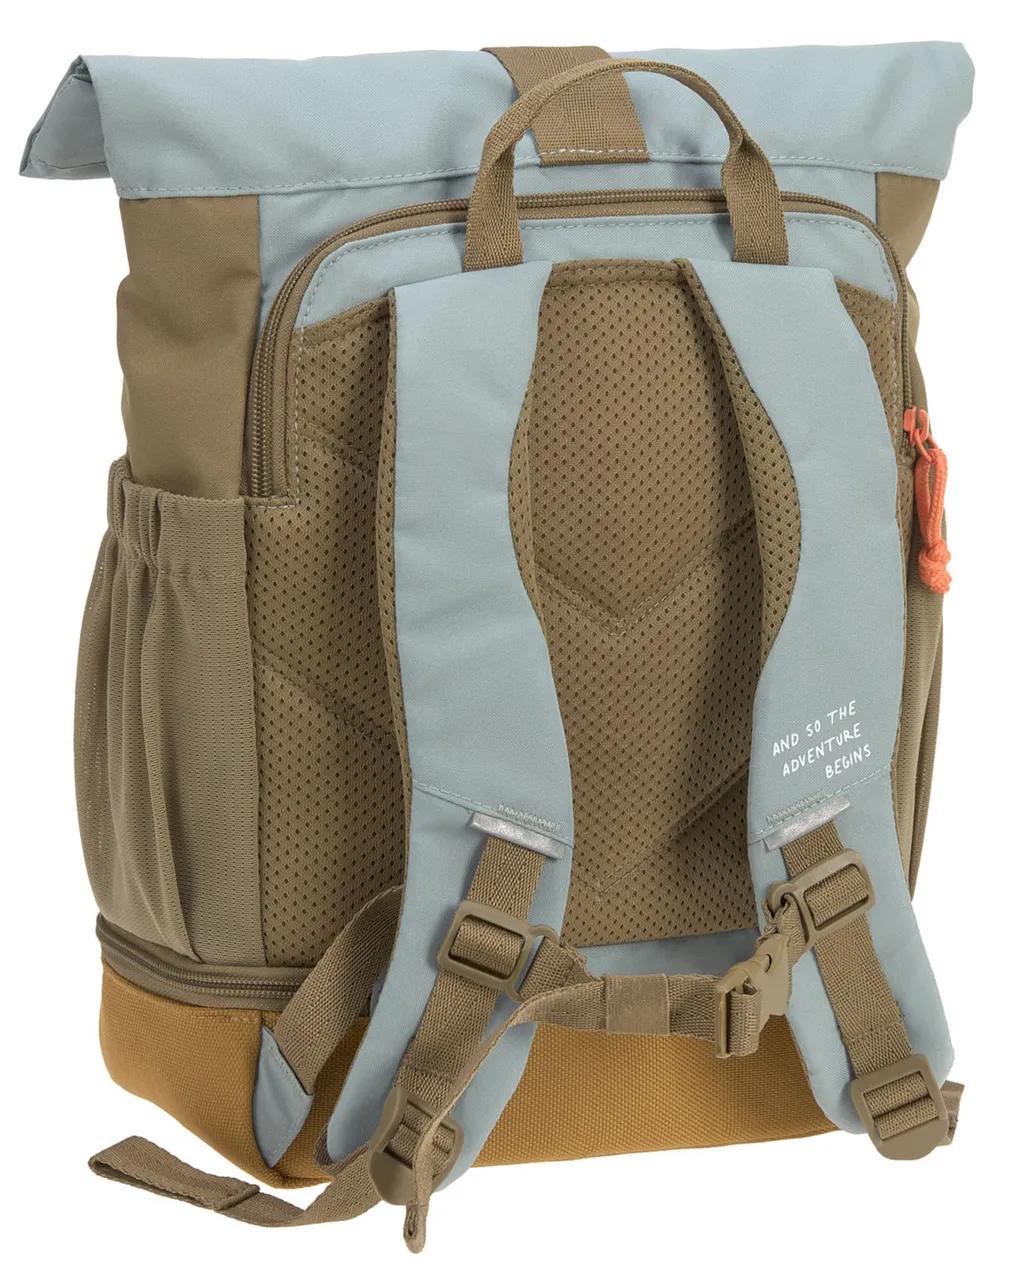 Rolltop-Rucksack NATURE (32,5x23x11) in olive